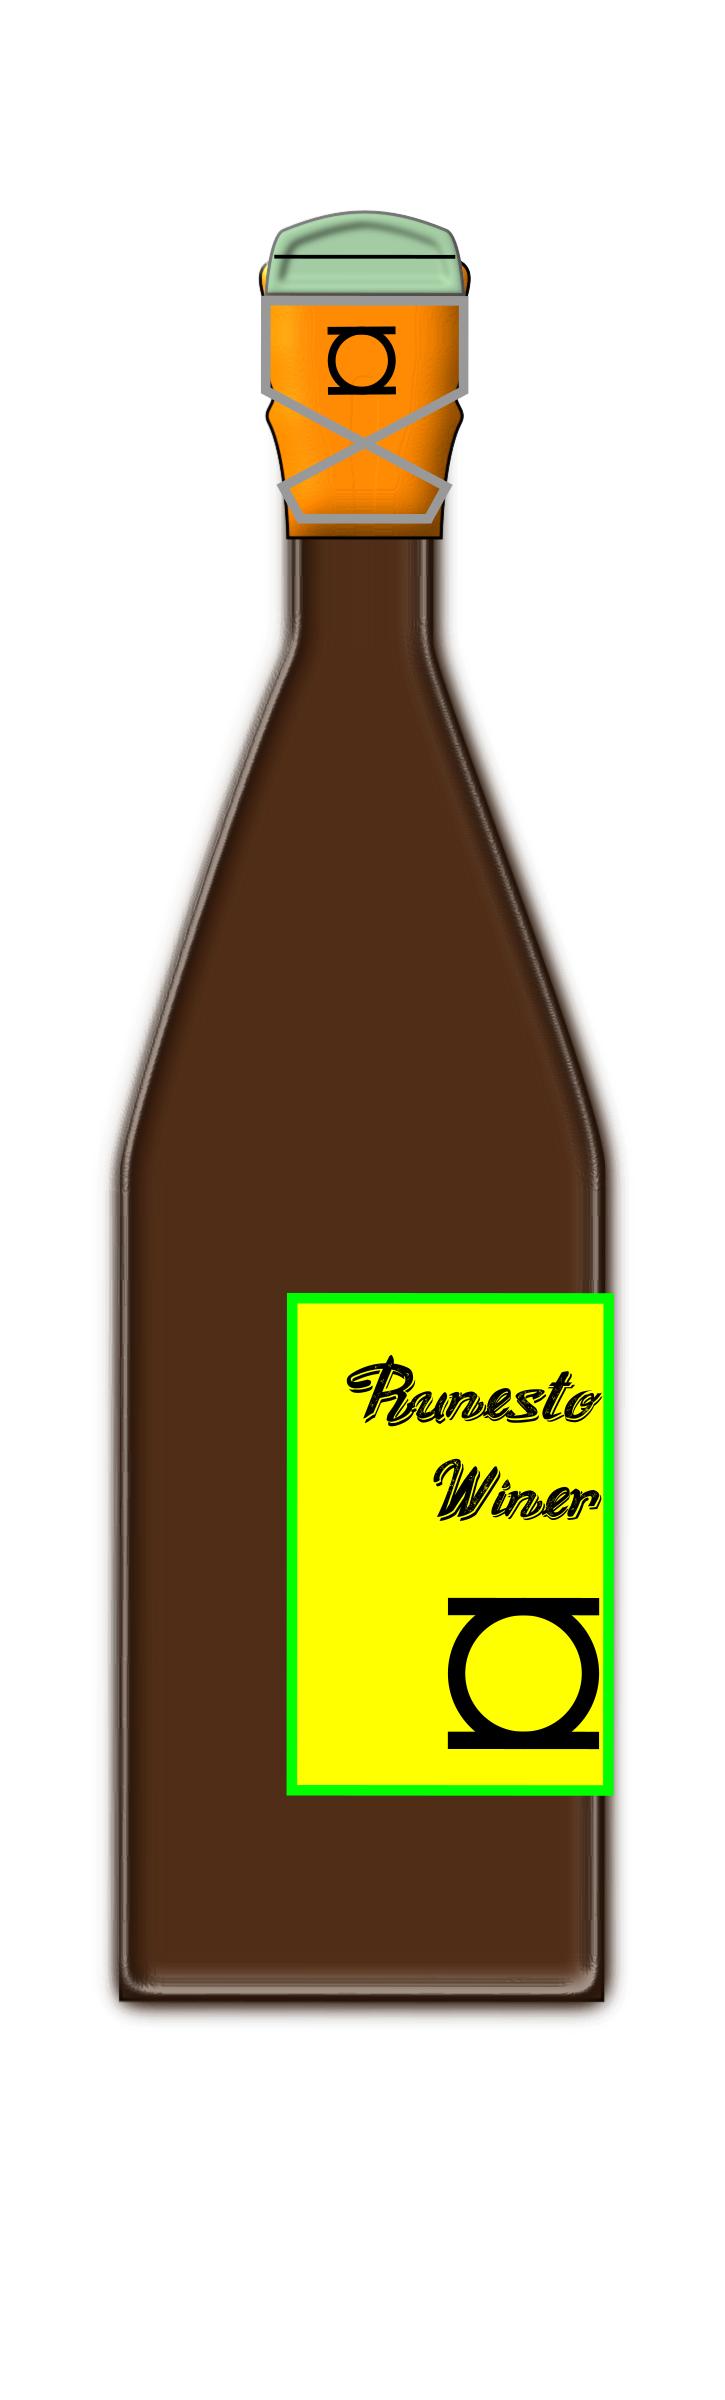 Champagne (standing) png